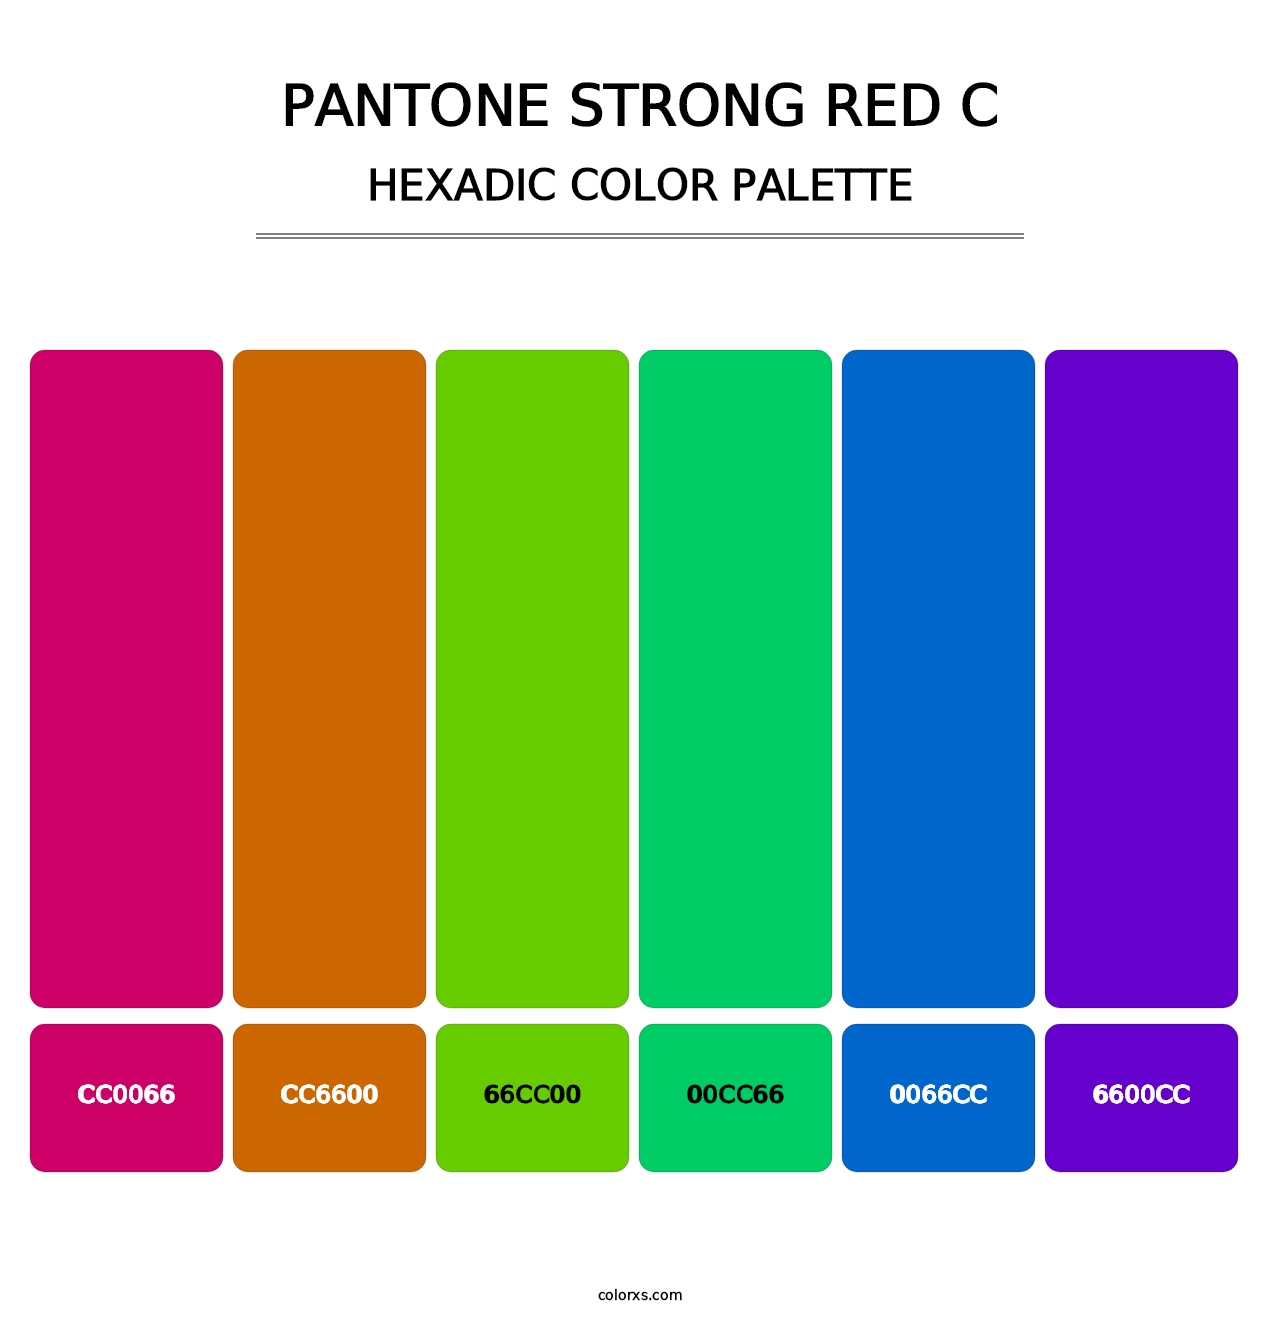 PANTONE Strong Red C - Hexadic Color Palette